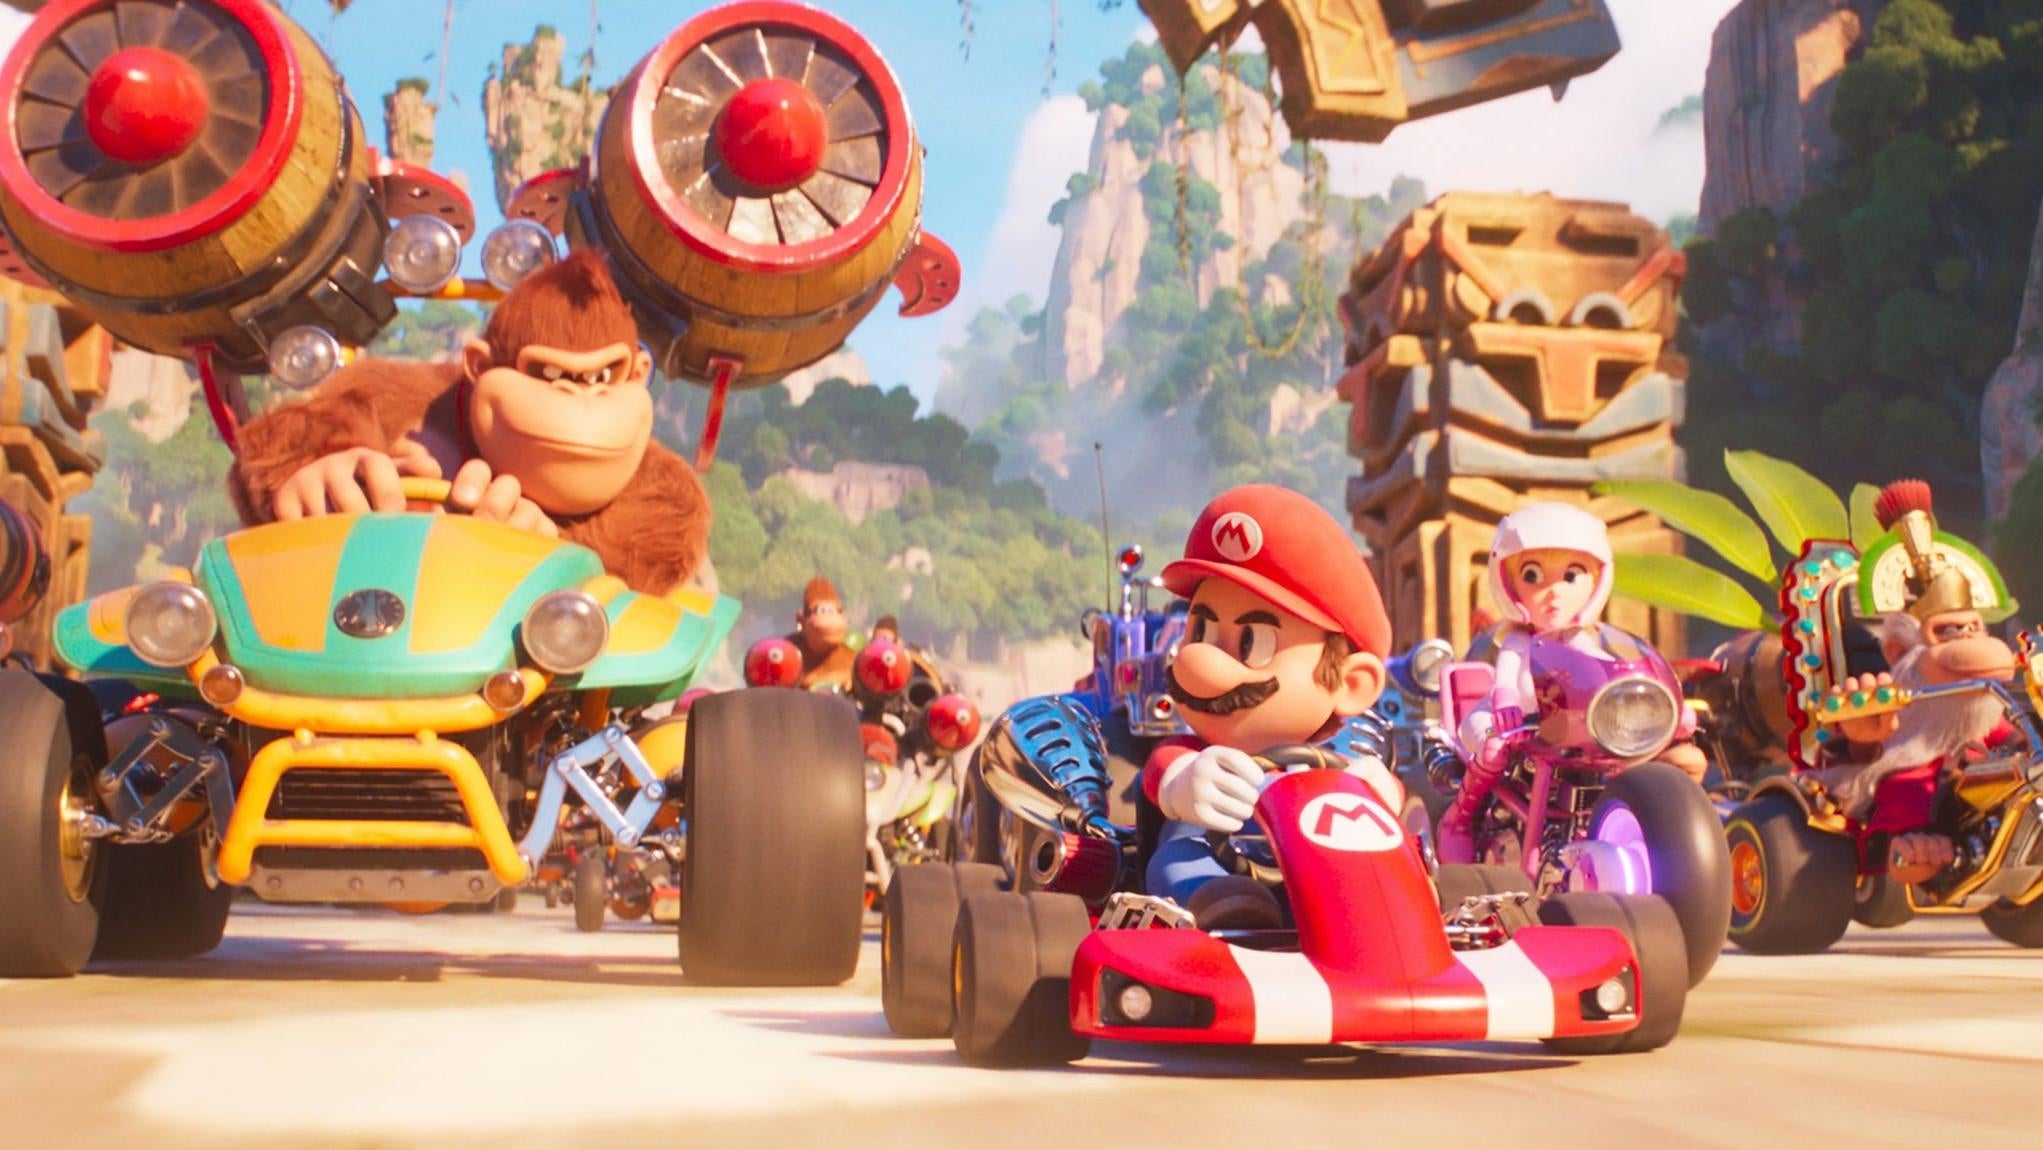 The Mario Kart scene is admittedly, pretty great. (Image: Universal)